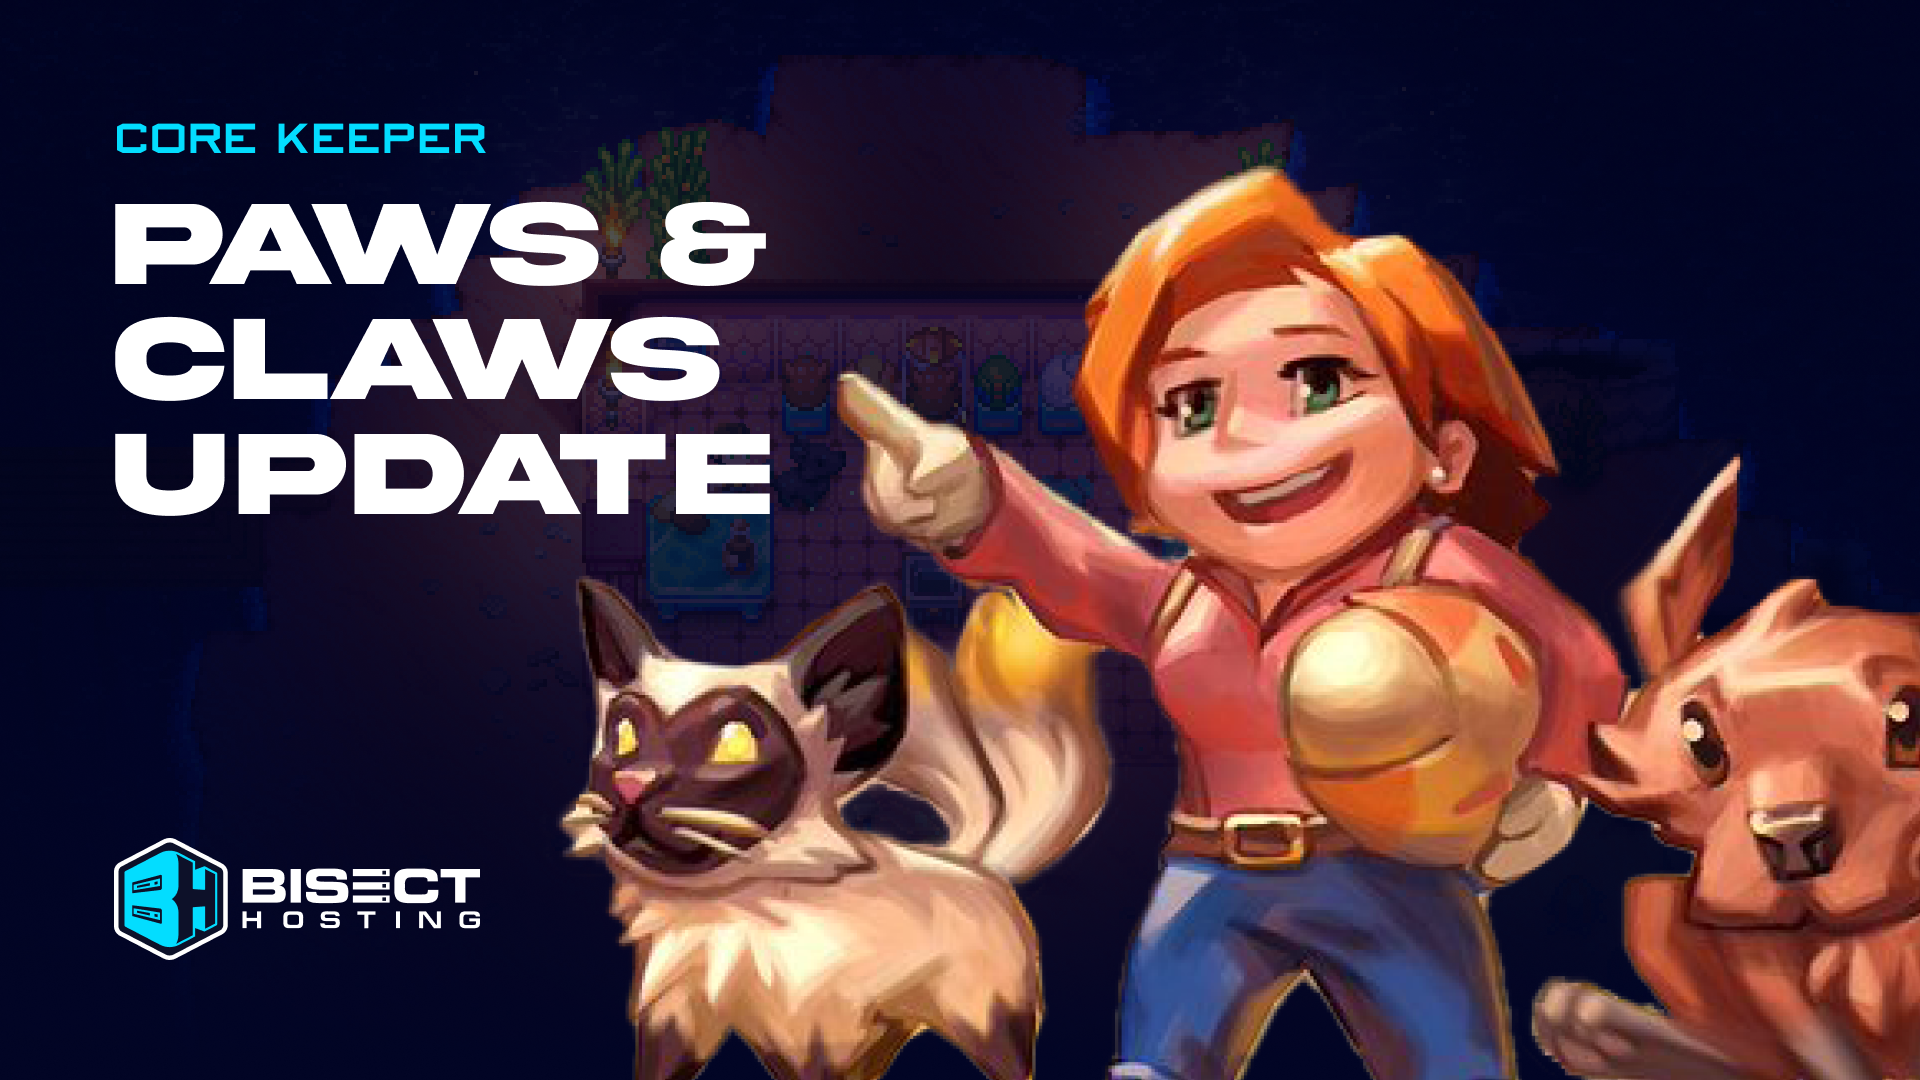 Core Keeper Paws & Claws Update: Release Date and All New Content